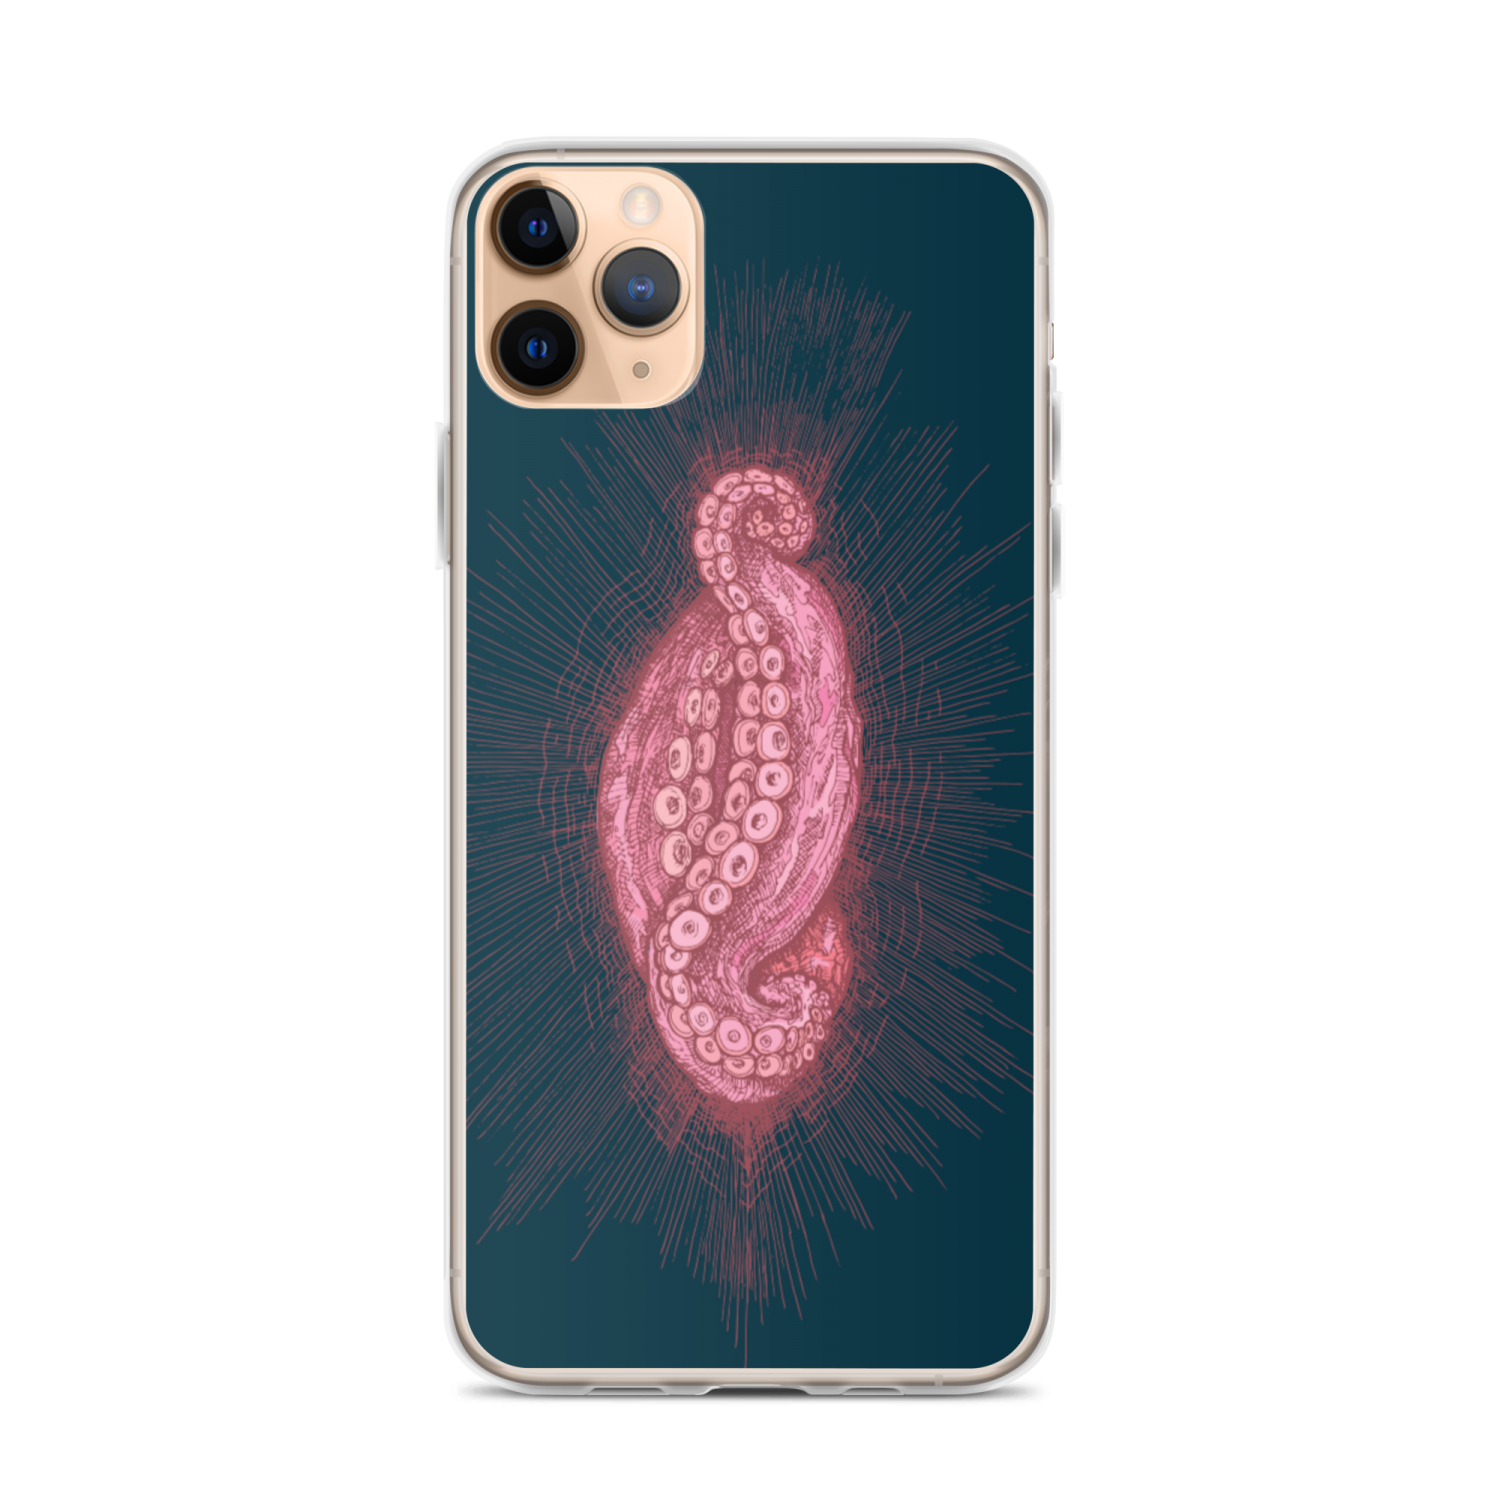 Octopussy iPhone 11 Pro Max